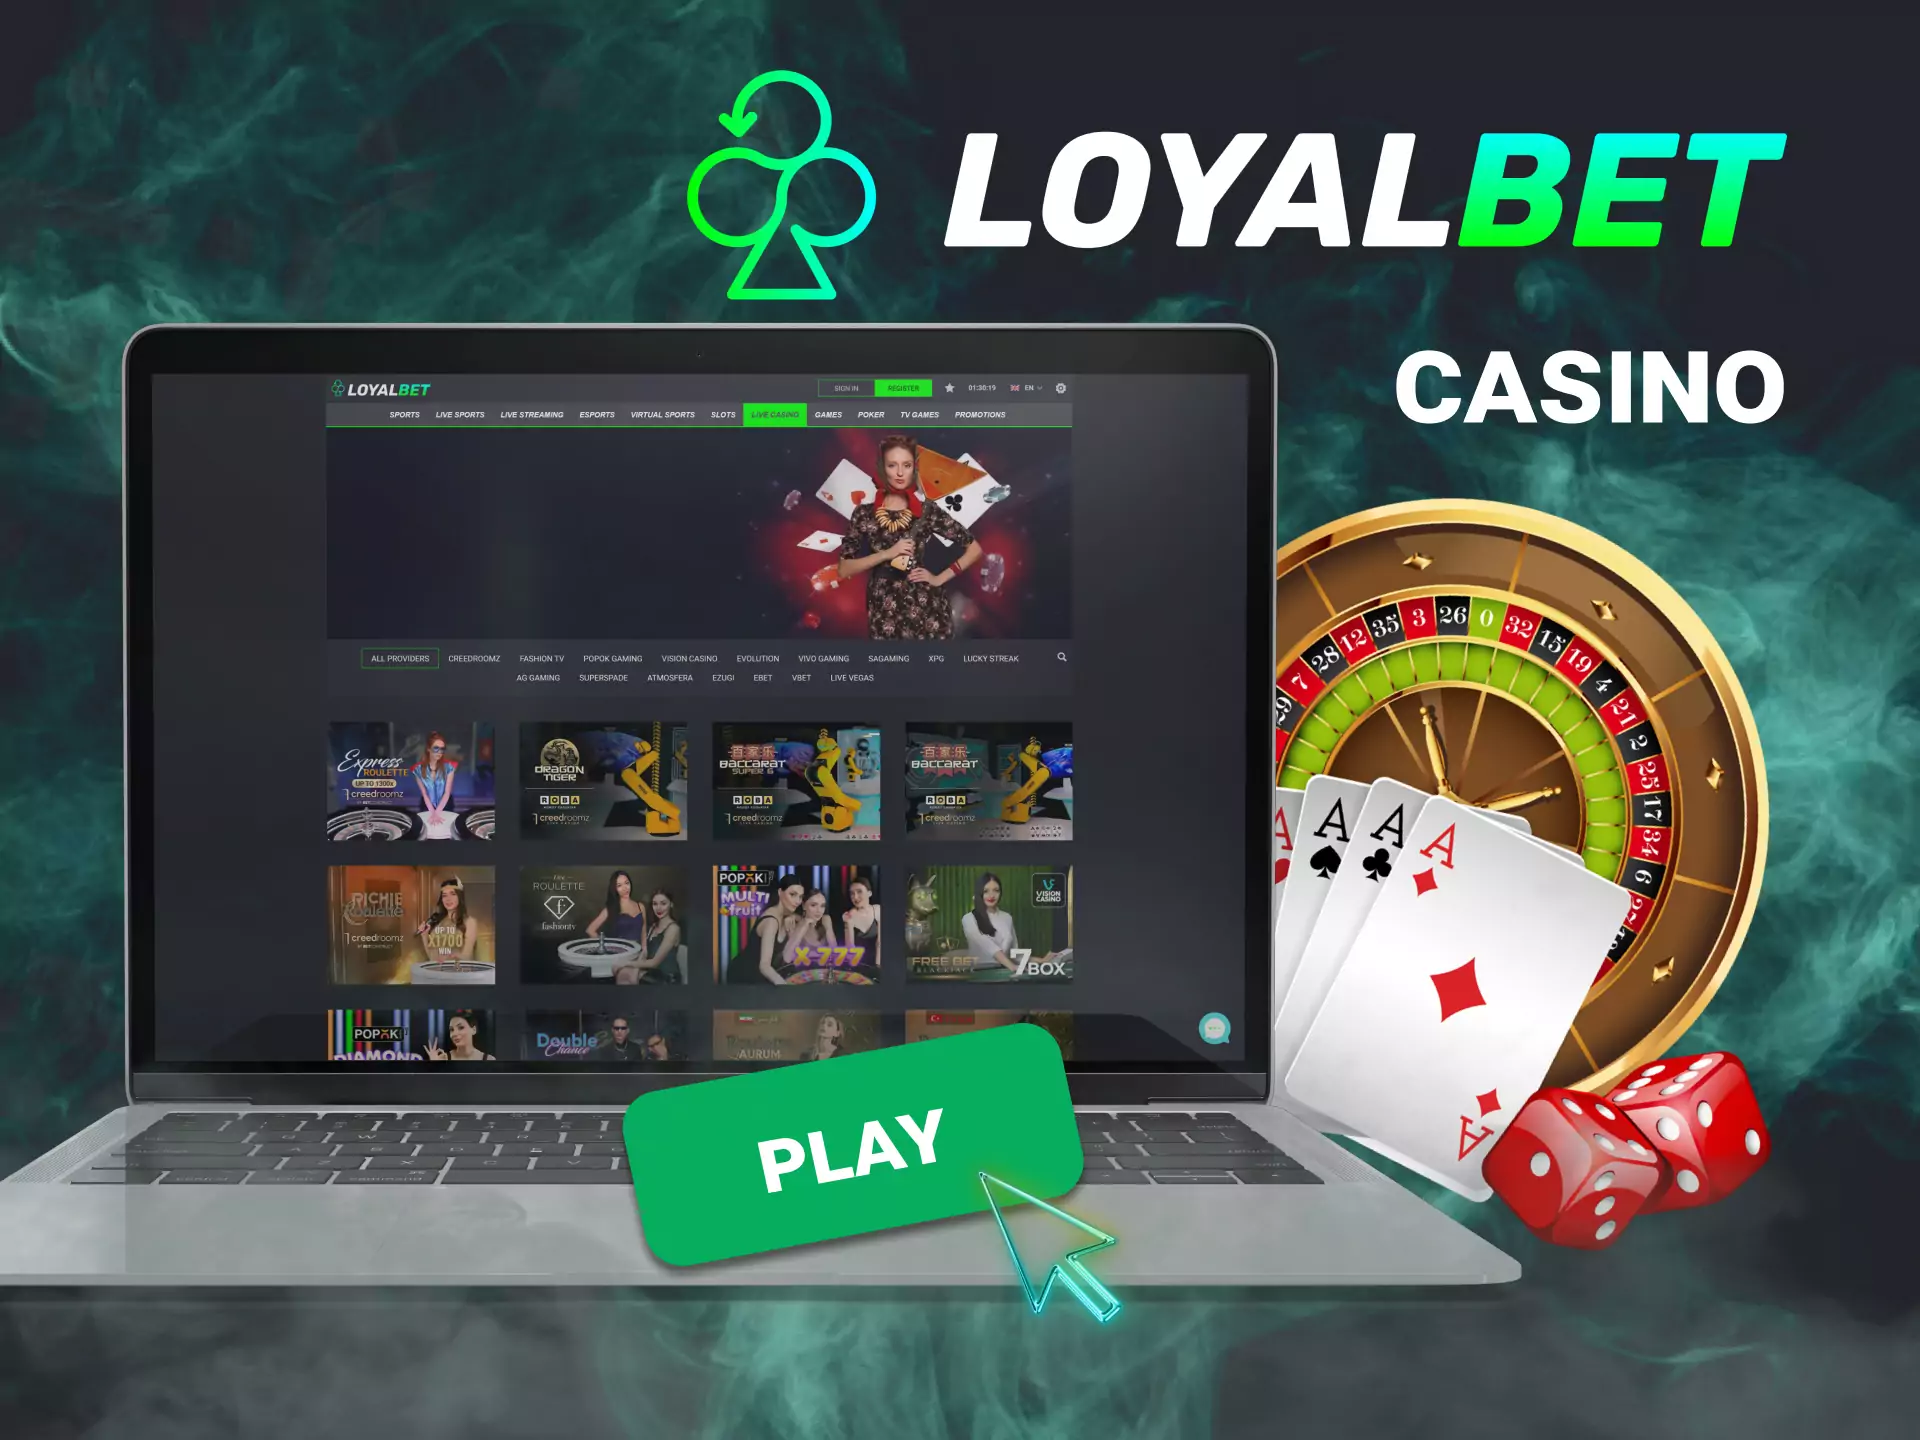 On Loyalbet, you can play casino games.